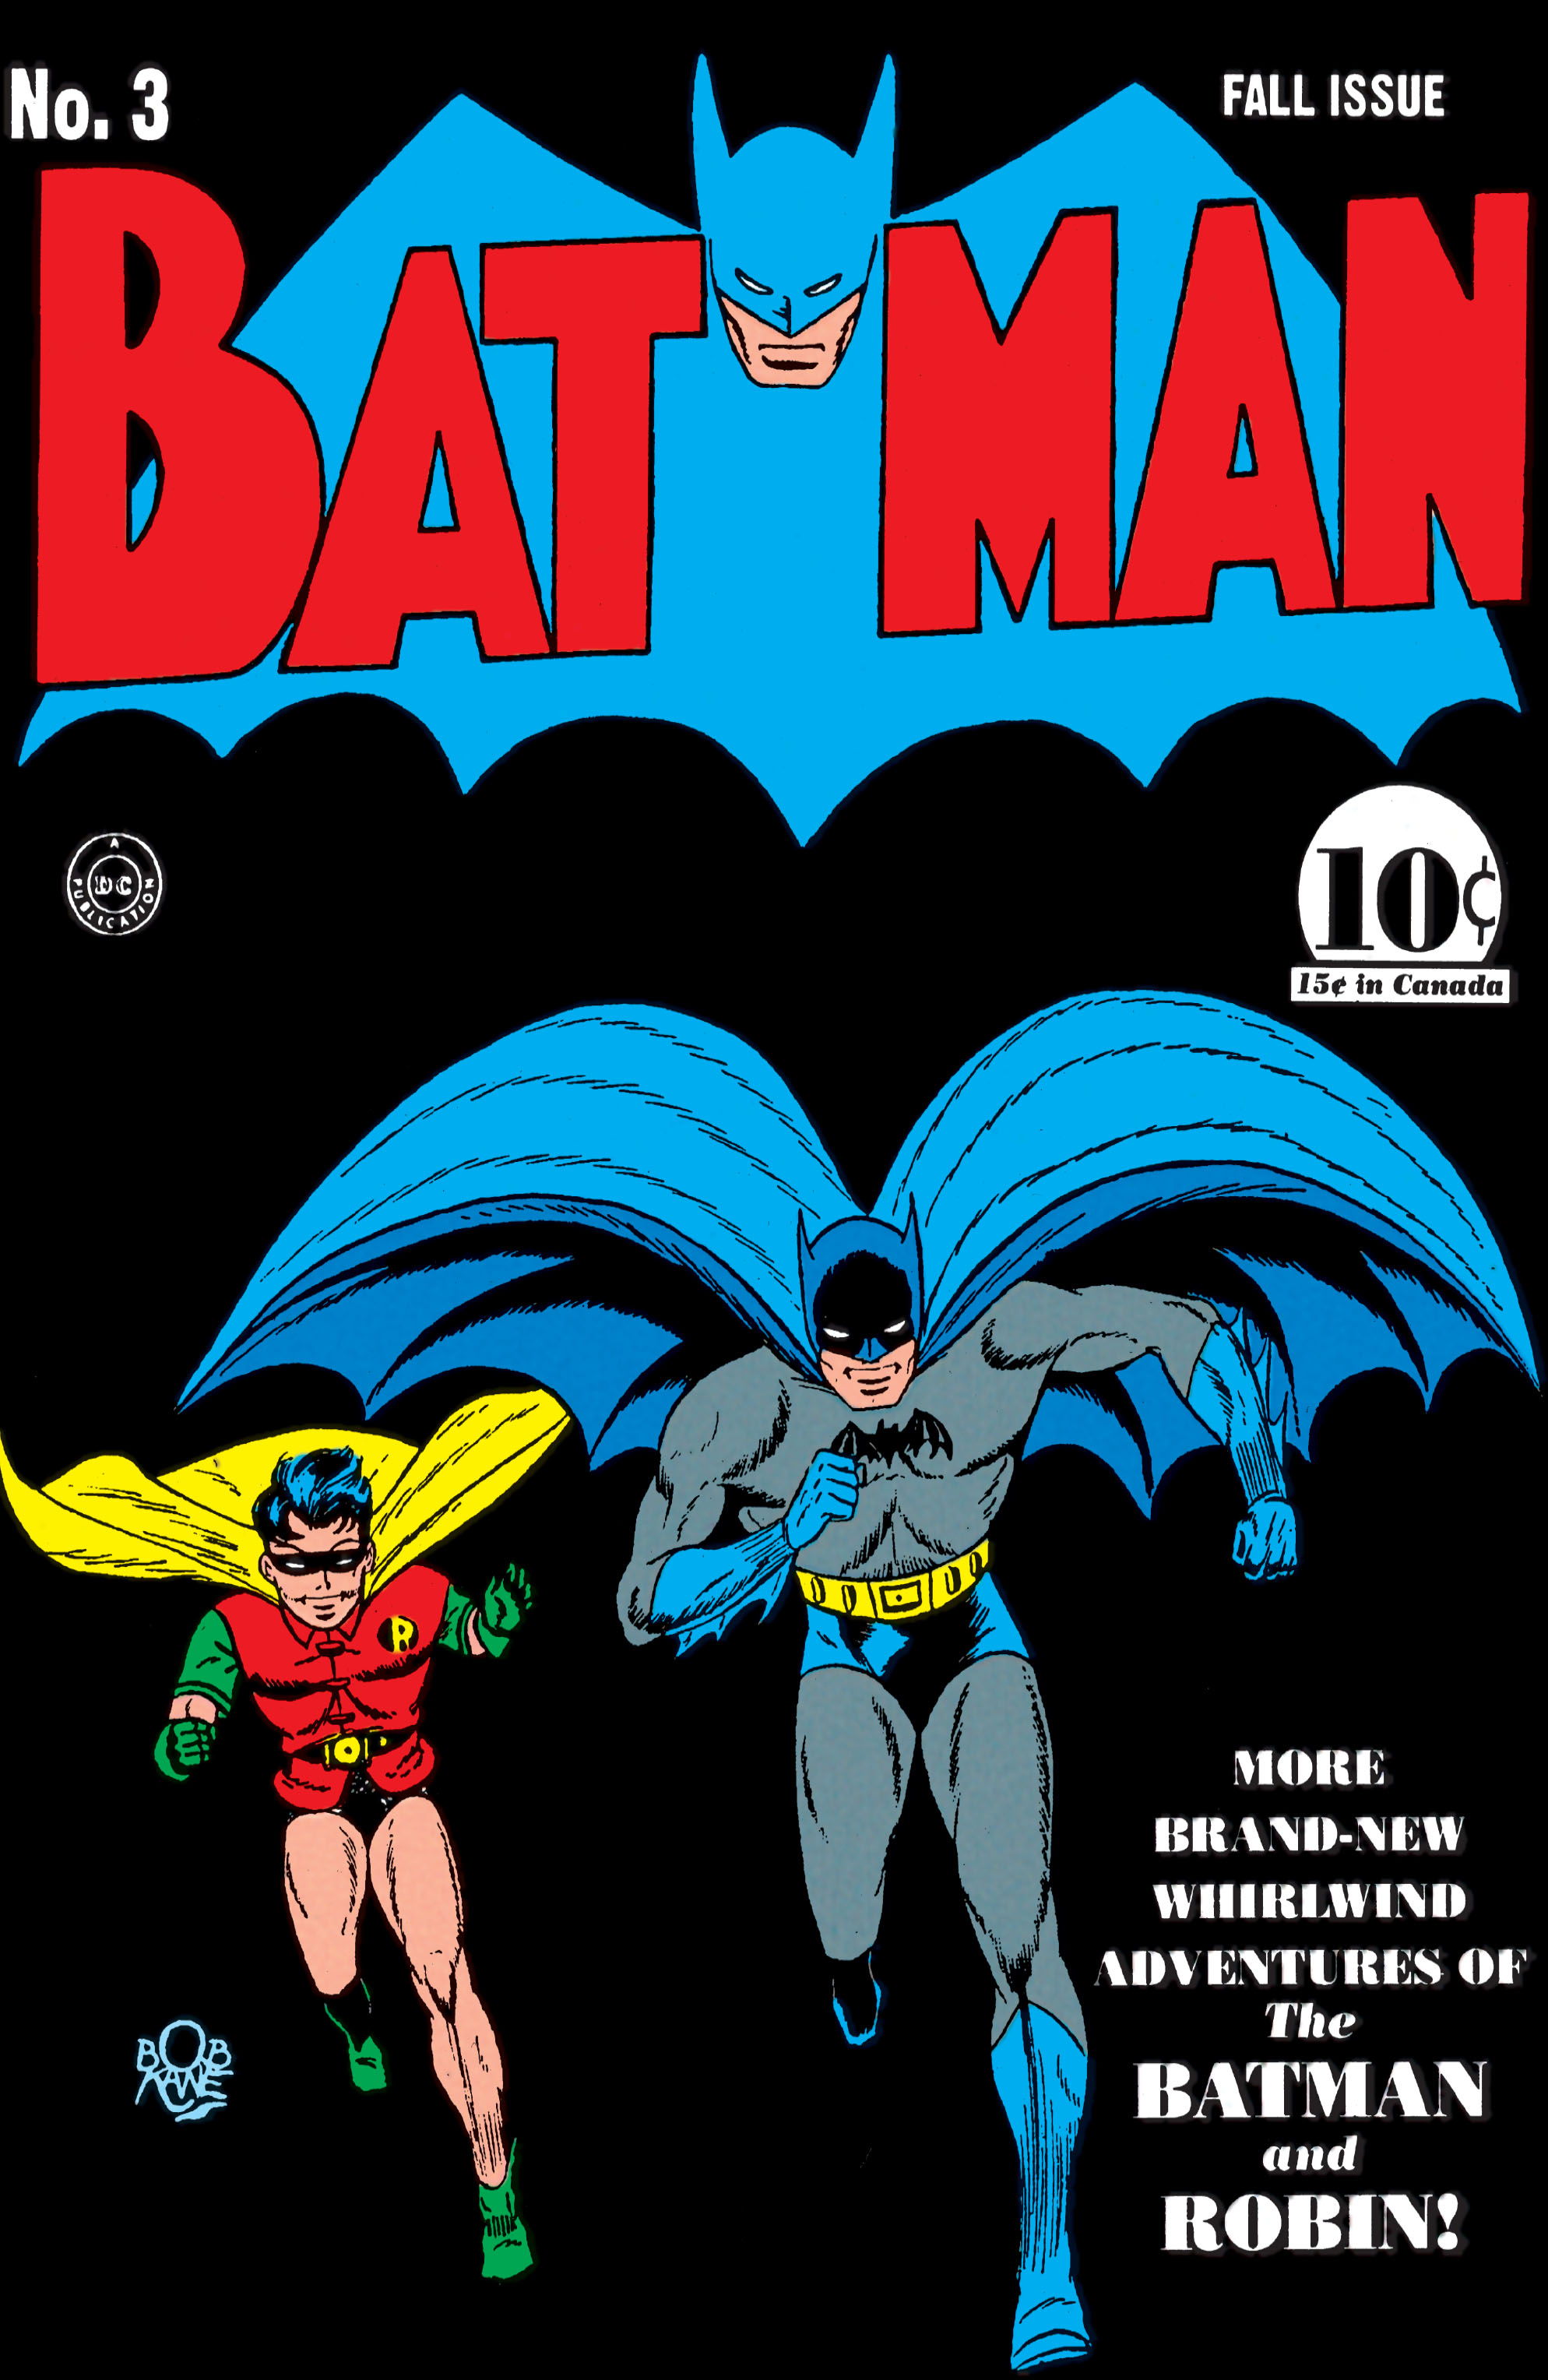 Batman 1940 Issue 3 | Read Batman 1940 Issue 3 comic online in high  quality. Read Full Comic online for free - Read comics online in high  quality .| READ COMIC ONLINE